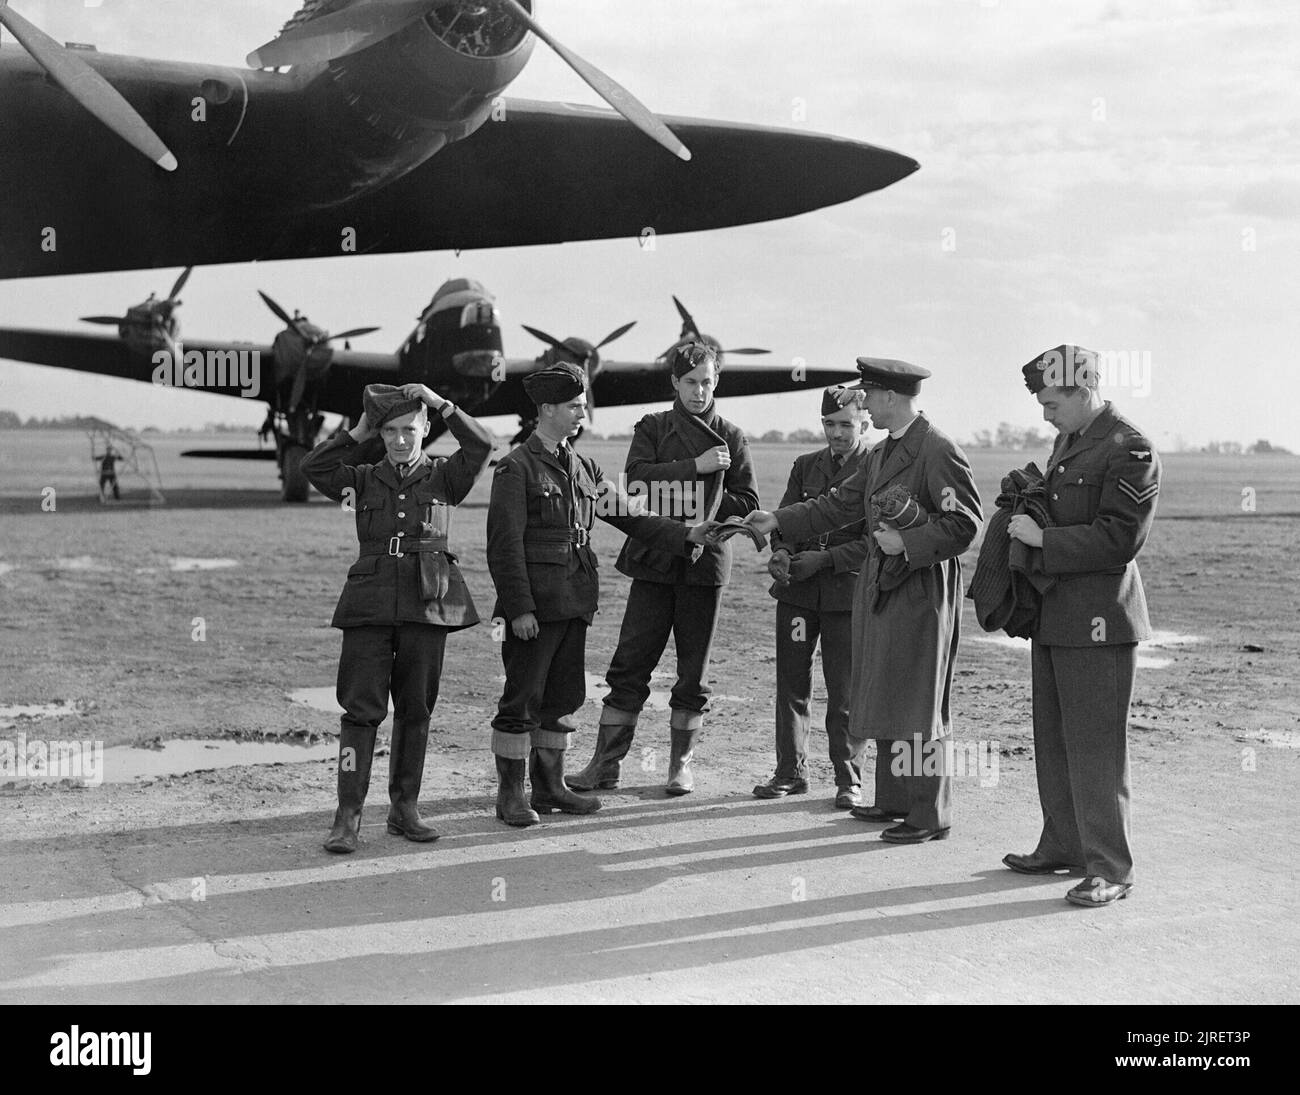 Royal Air Force 1939-1945- Bomber Command Squadron Leader The Reverend E T Killick (second from right), Station Chaplain at RAF Oakington, hands out 'winter warmers' from the RAF Comforts Fund to ground crew on a crisp autumnal morning, 24 October 1942. Two No. 7 Squadron Stirlings are in the background. Stock Photo